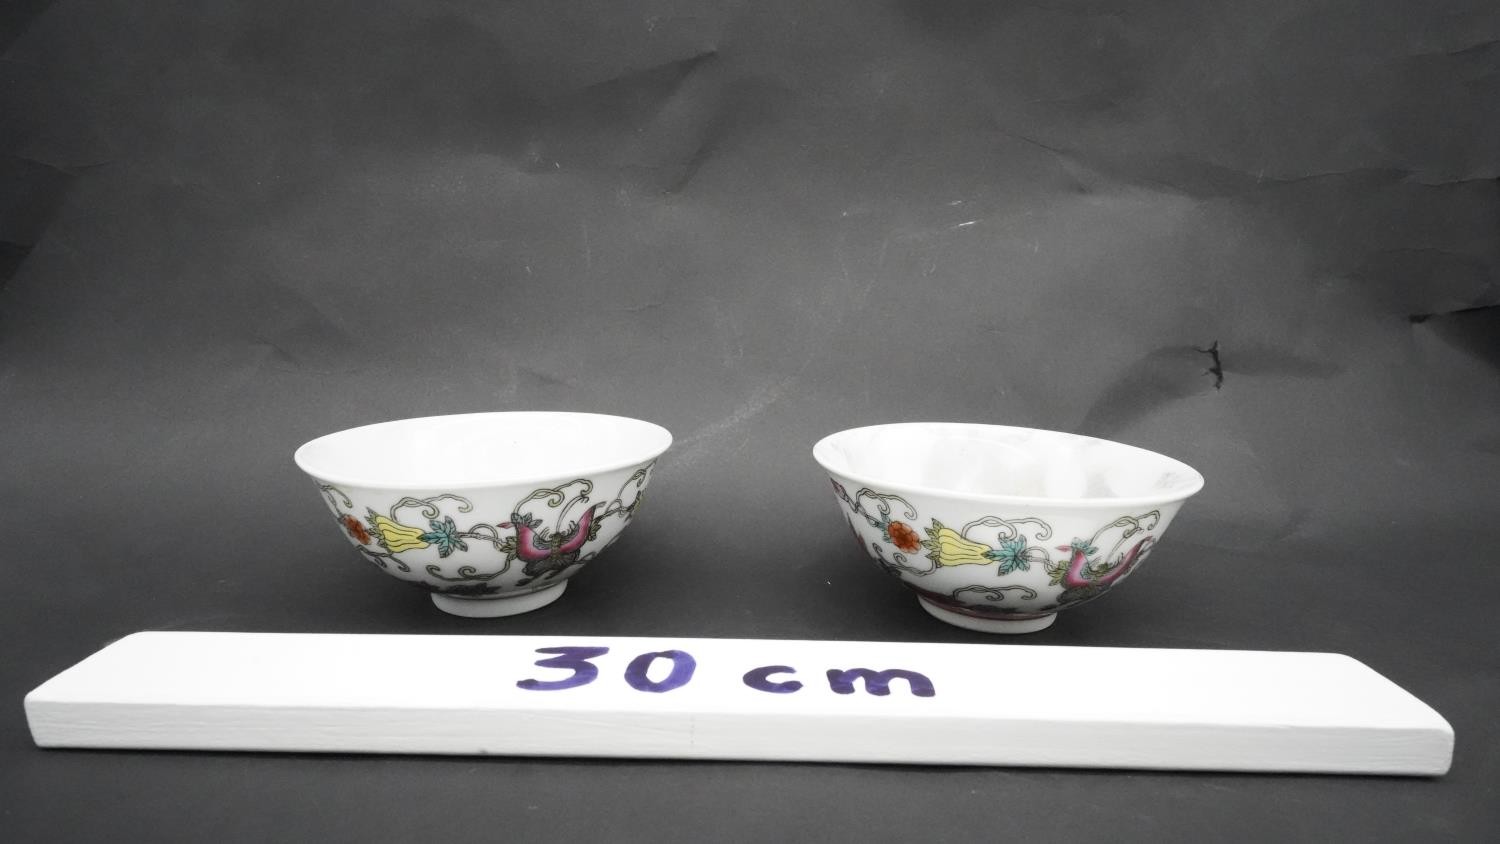 A pair of Chinese Qing period Famille Rose porcelain bowls. Decorated with flowers, fruit and